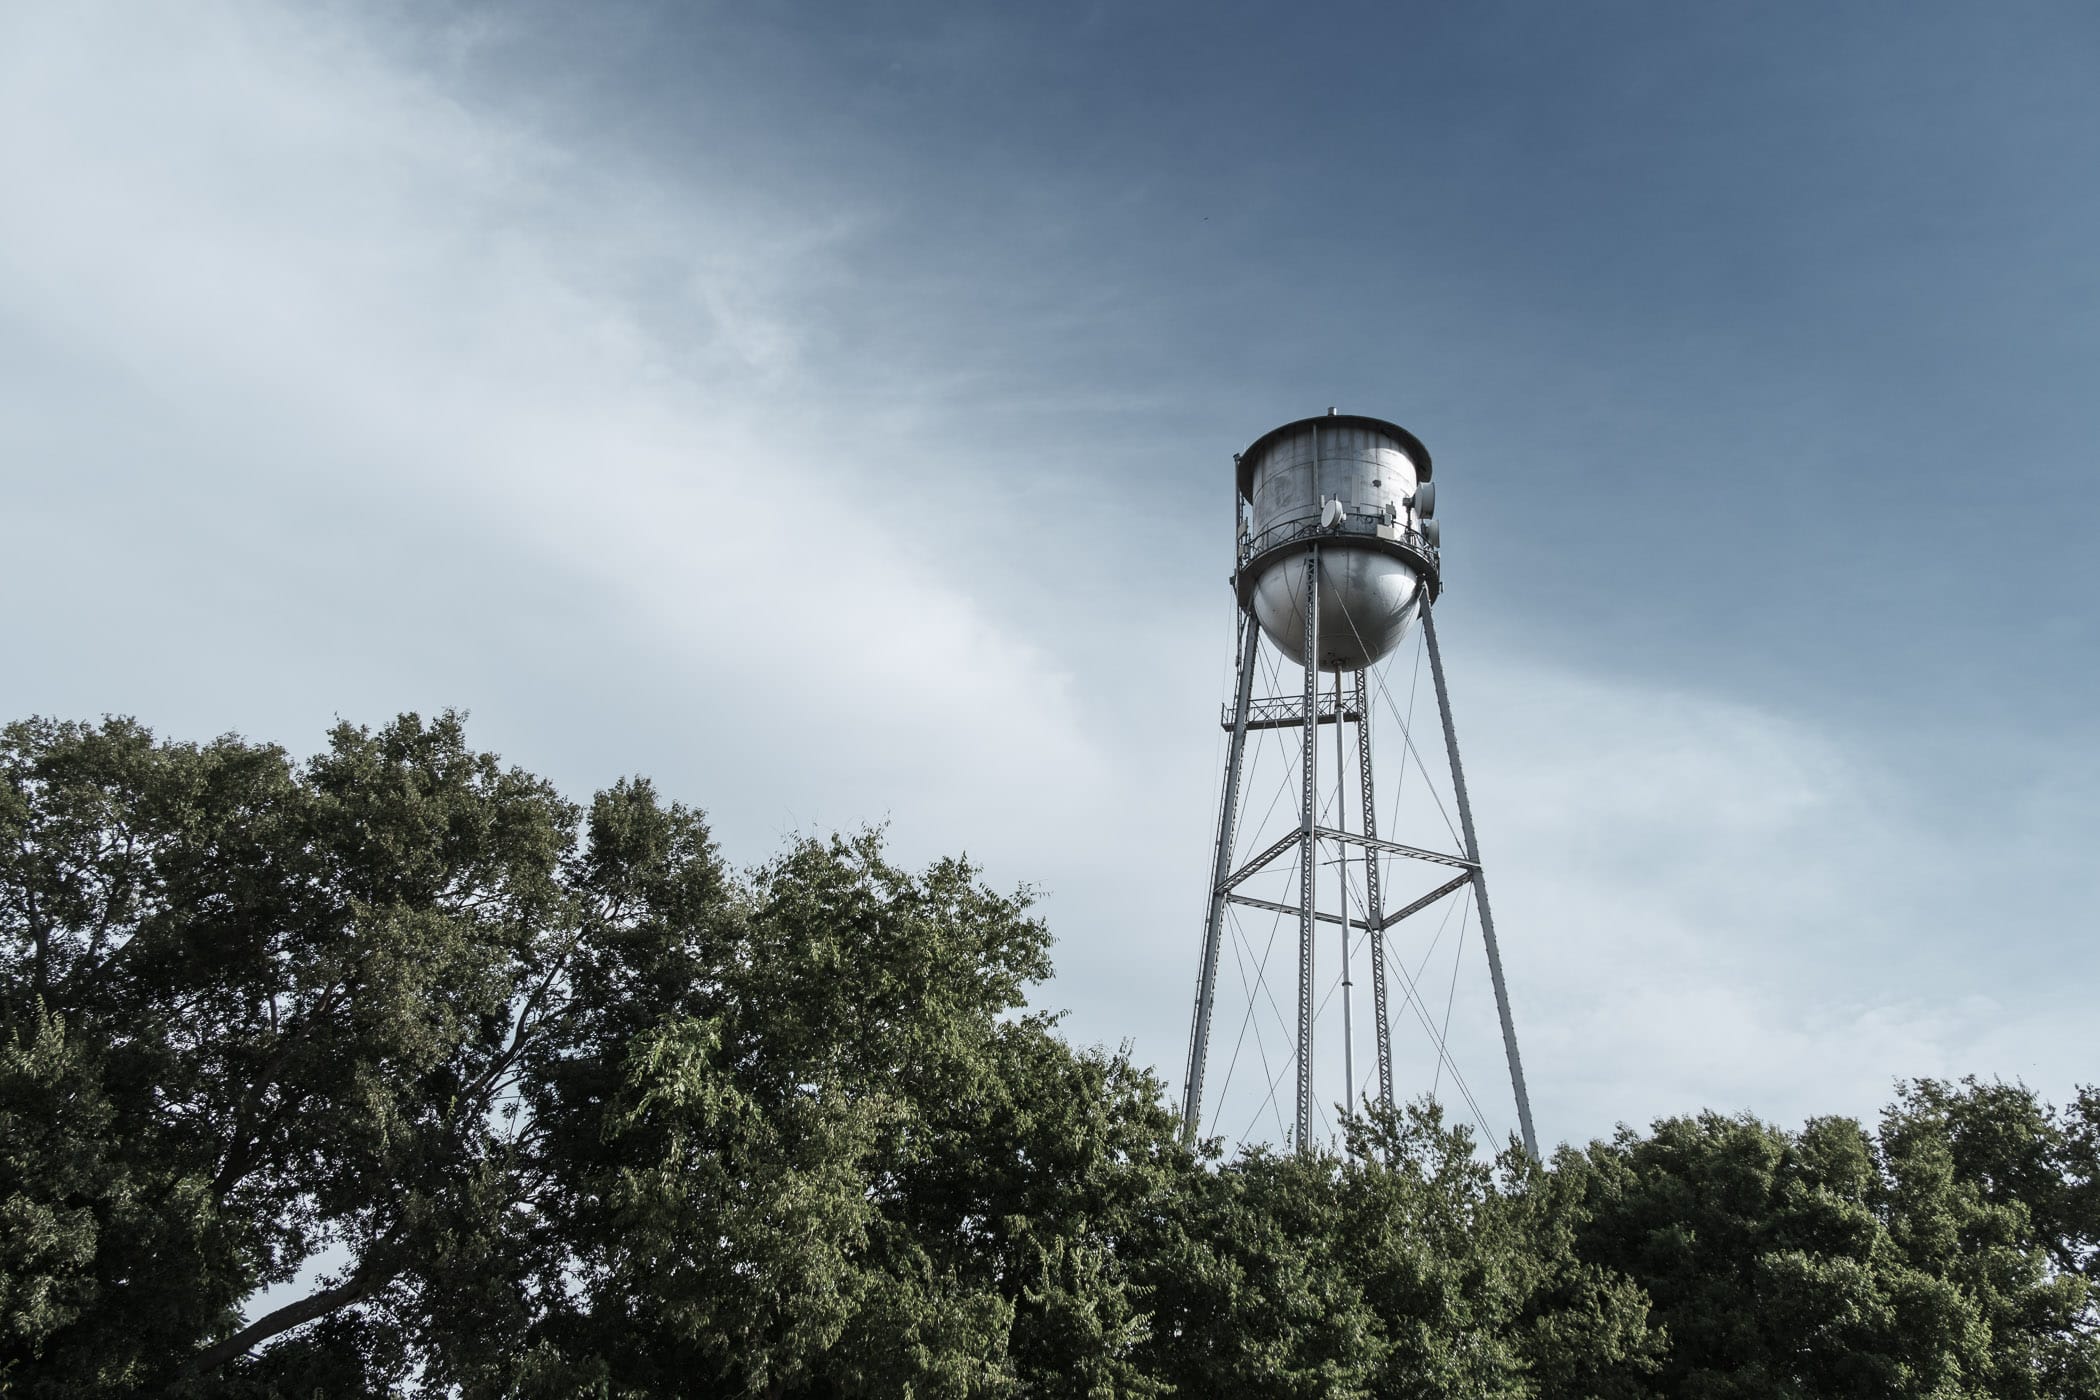 A water tower stands tall over trees in the small North Texas town of Trenton.